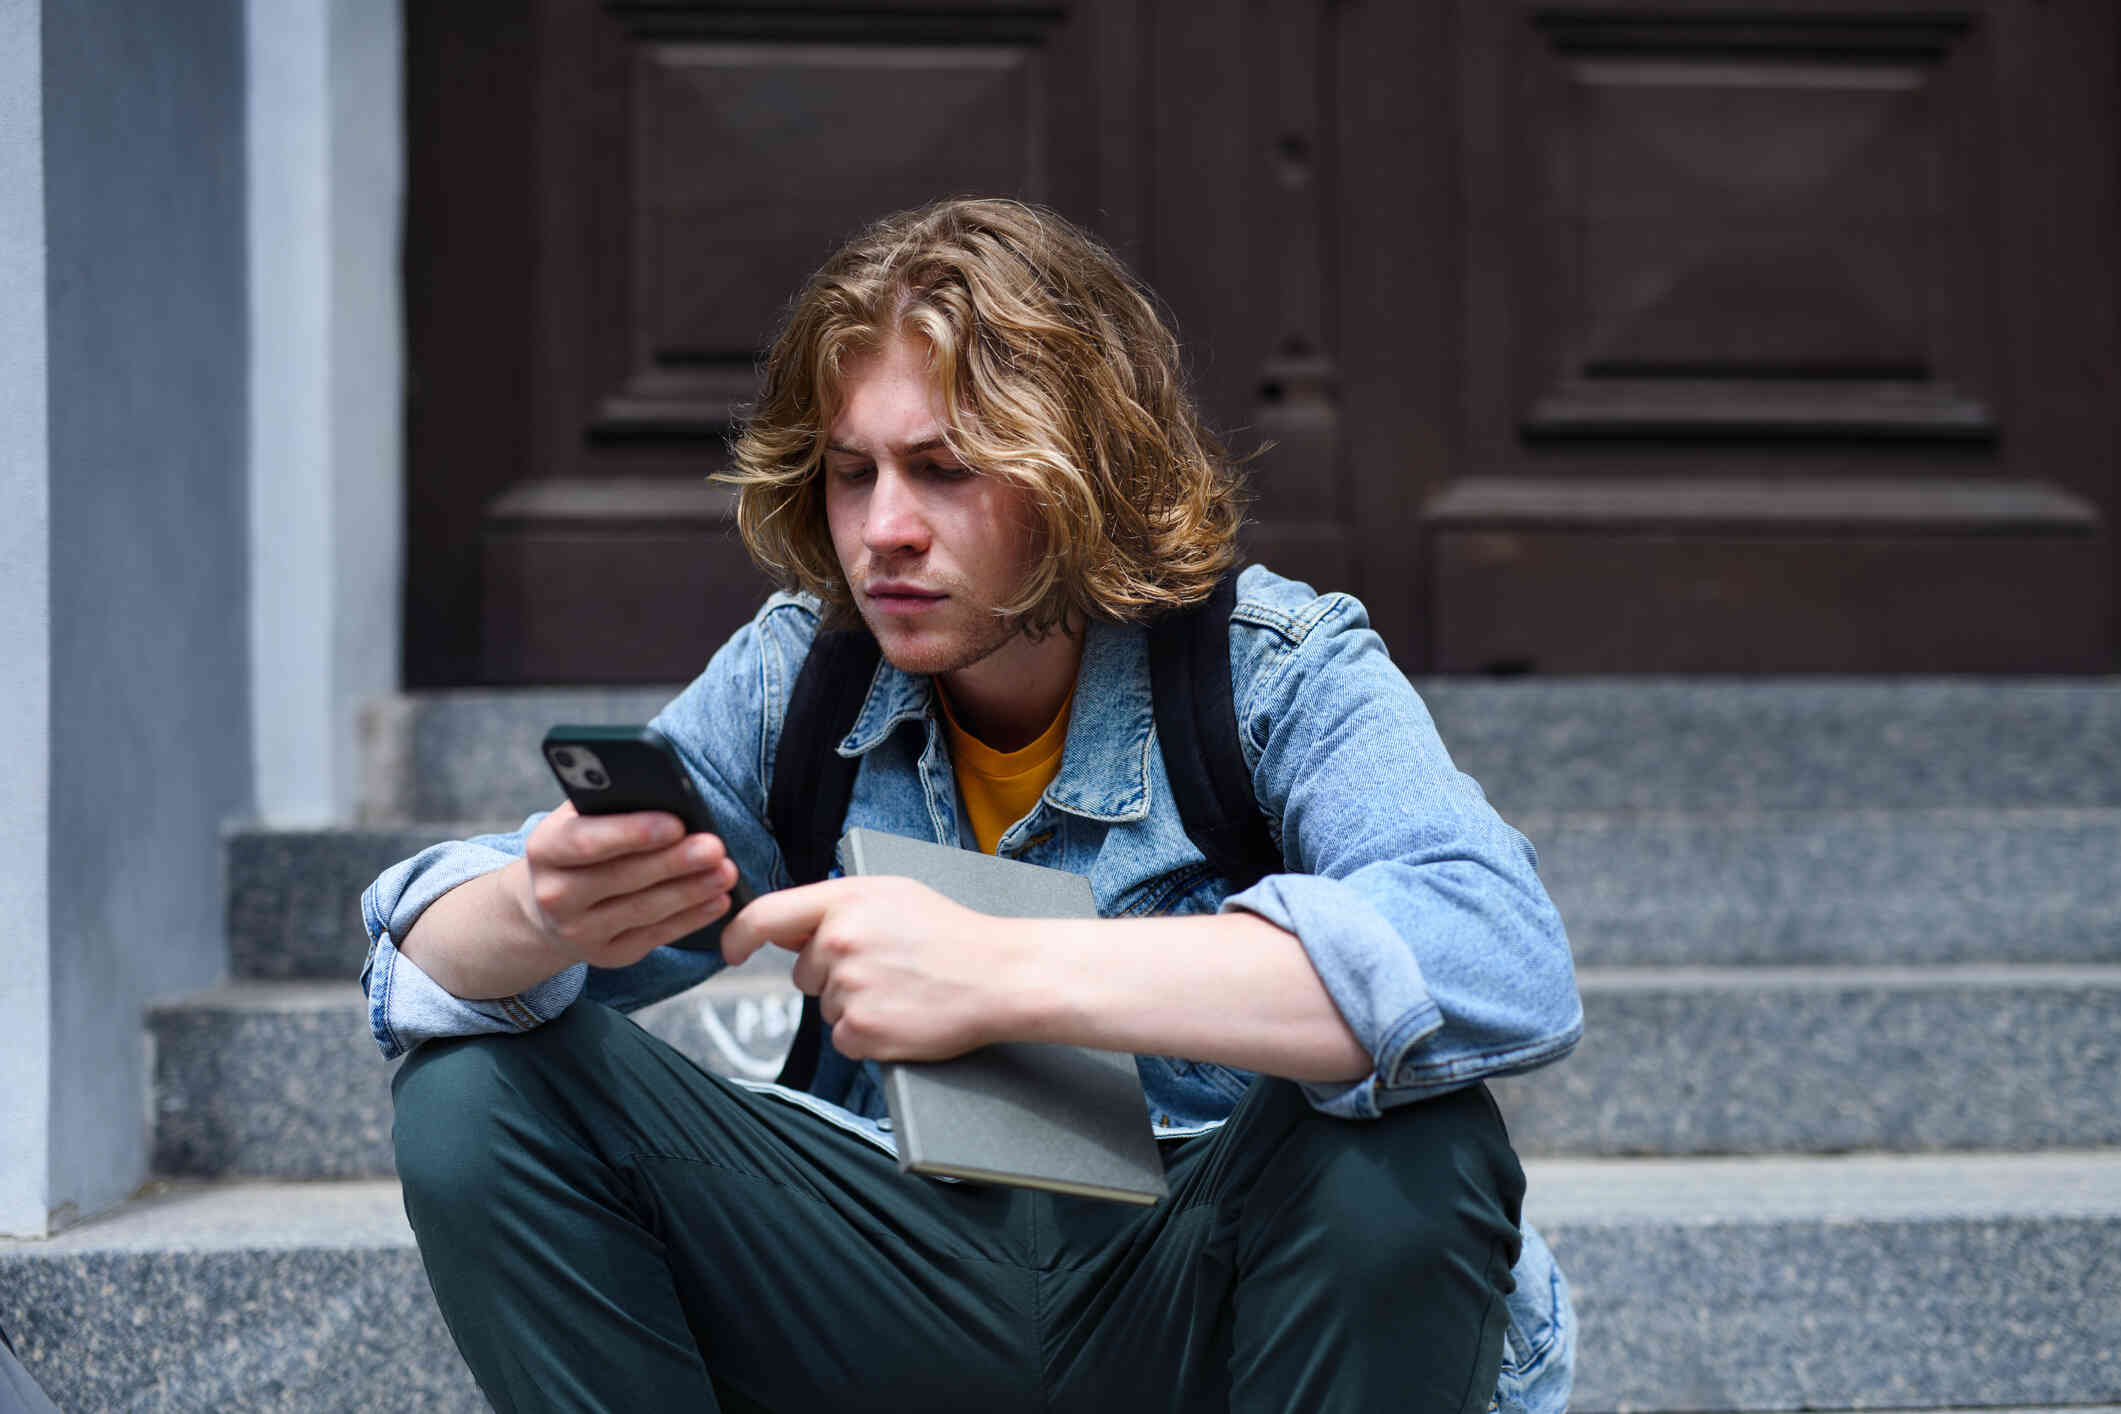 A man wearing a backpack sits on cement steps outside and lokos down at the phone in his hand with a serious expression.